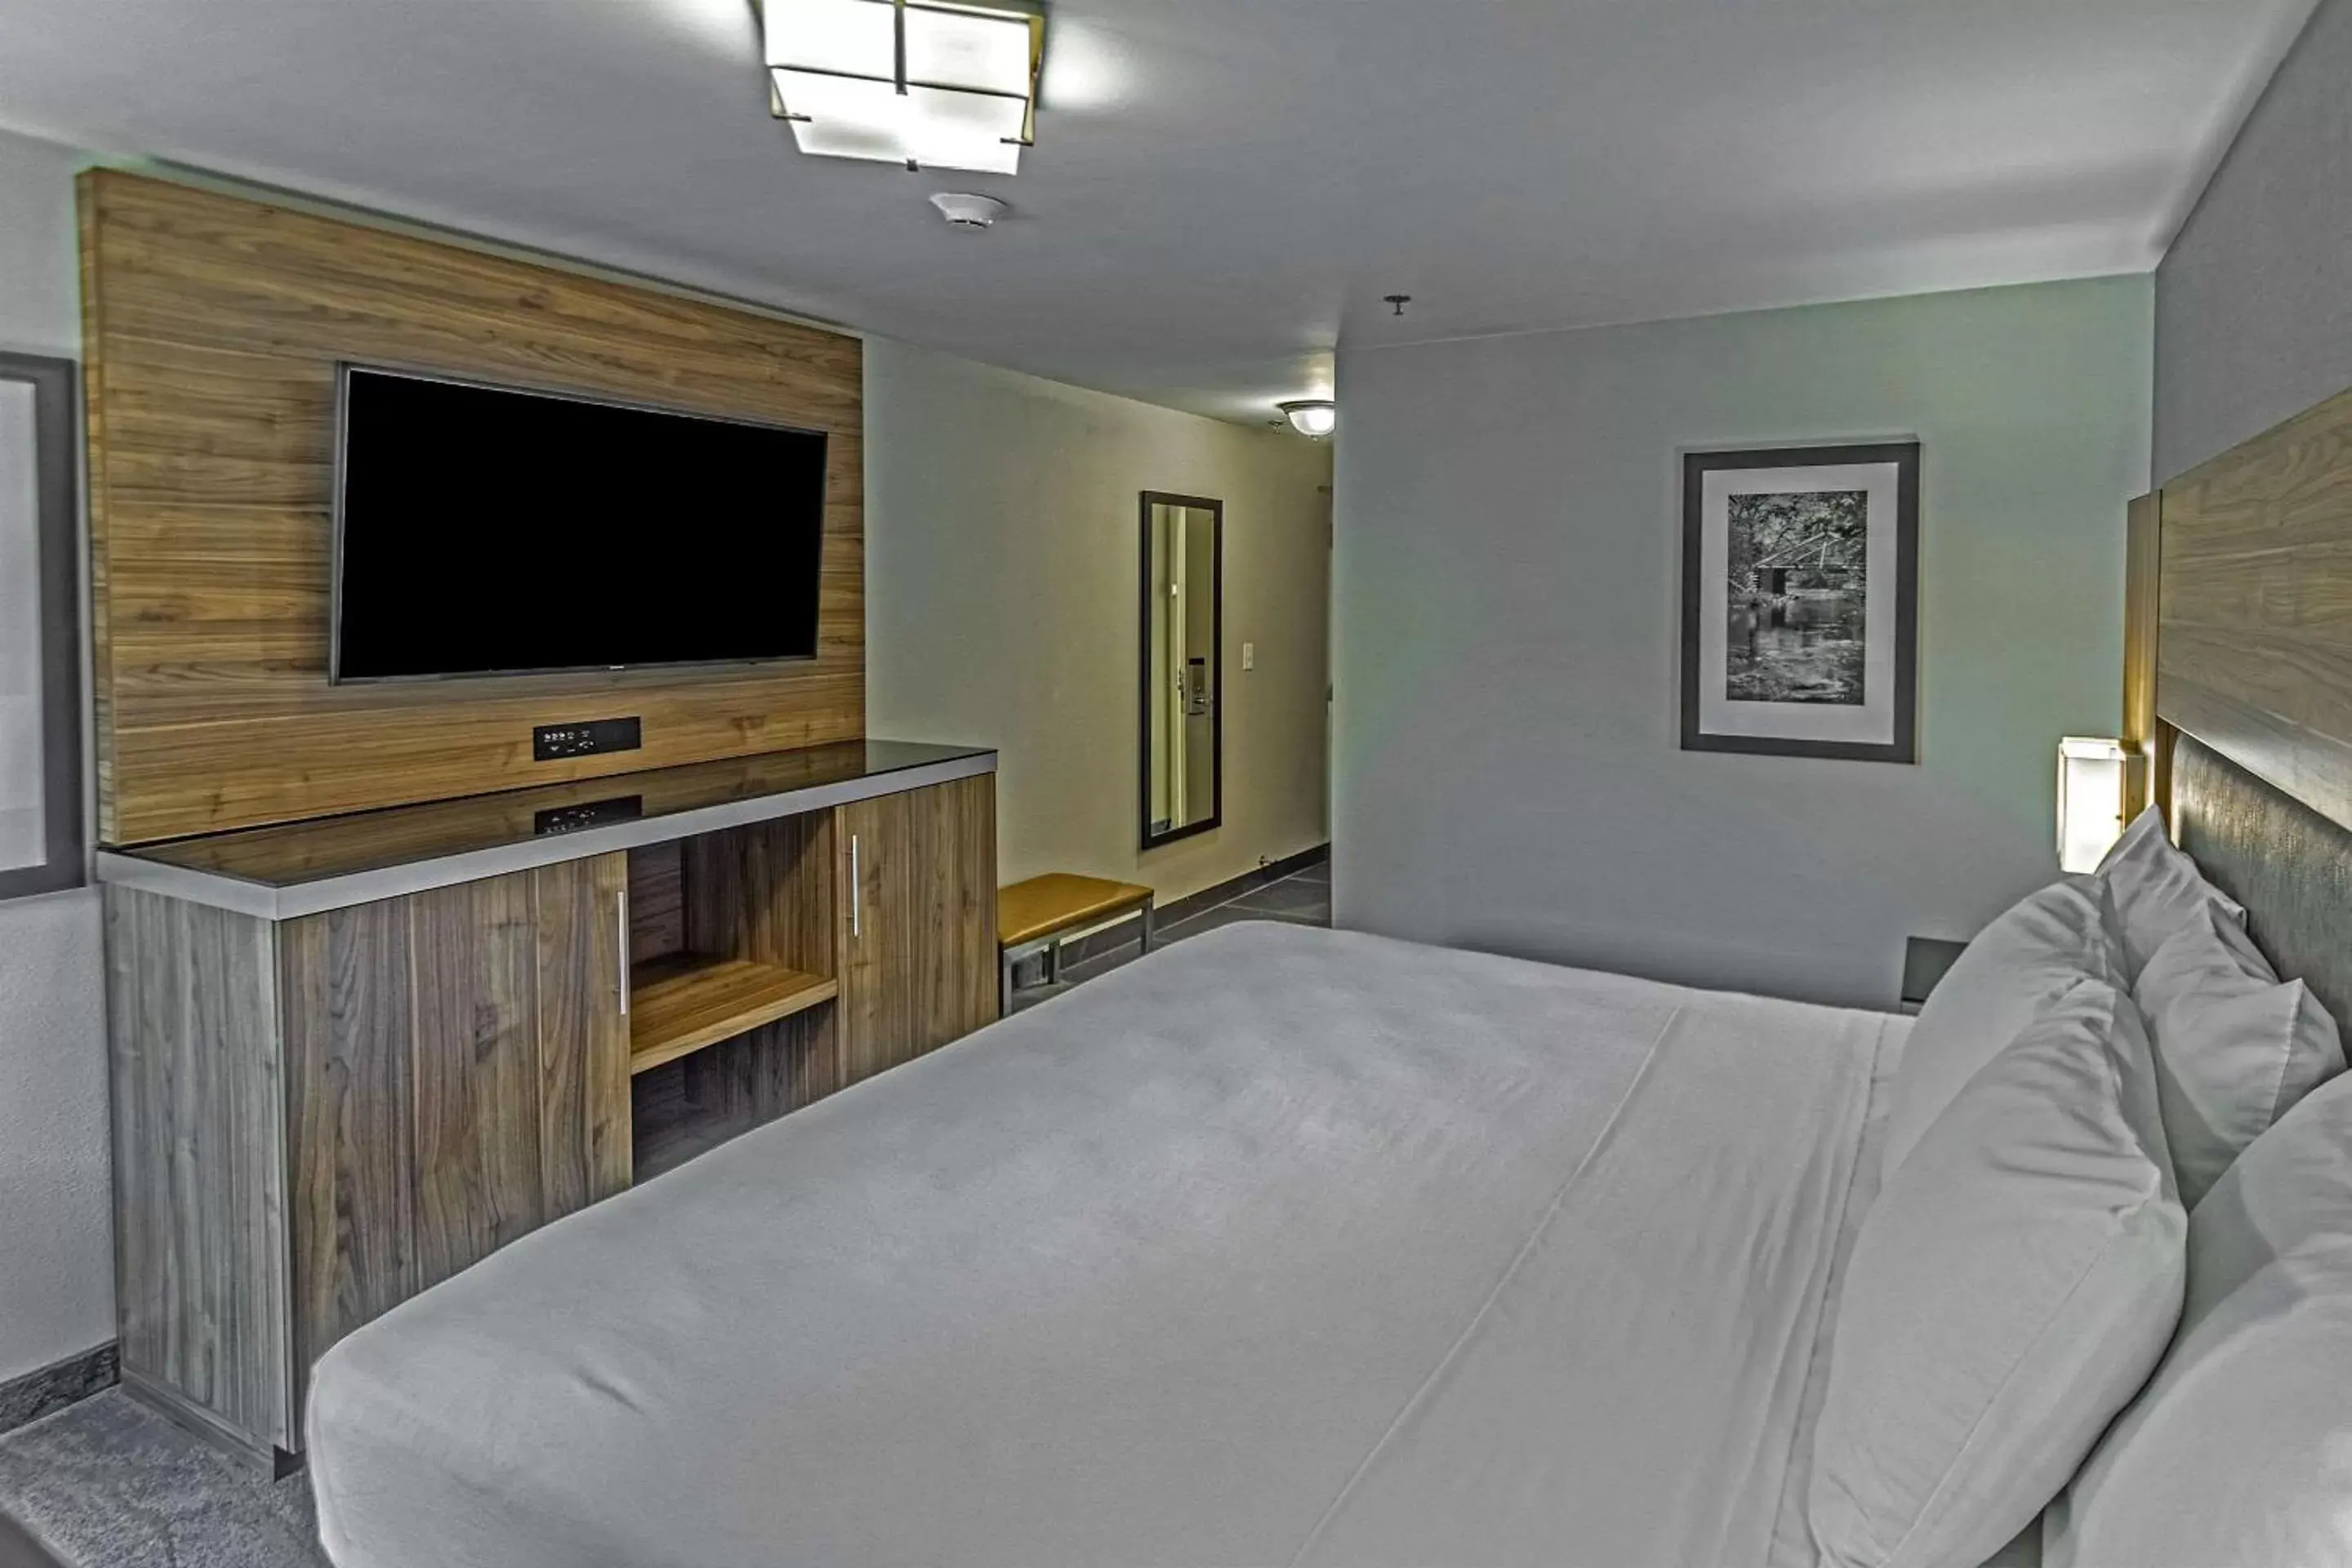 Bed in The Penn Stroud, Stroudsburg - Poconos, Ascend Hotel Collection